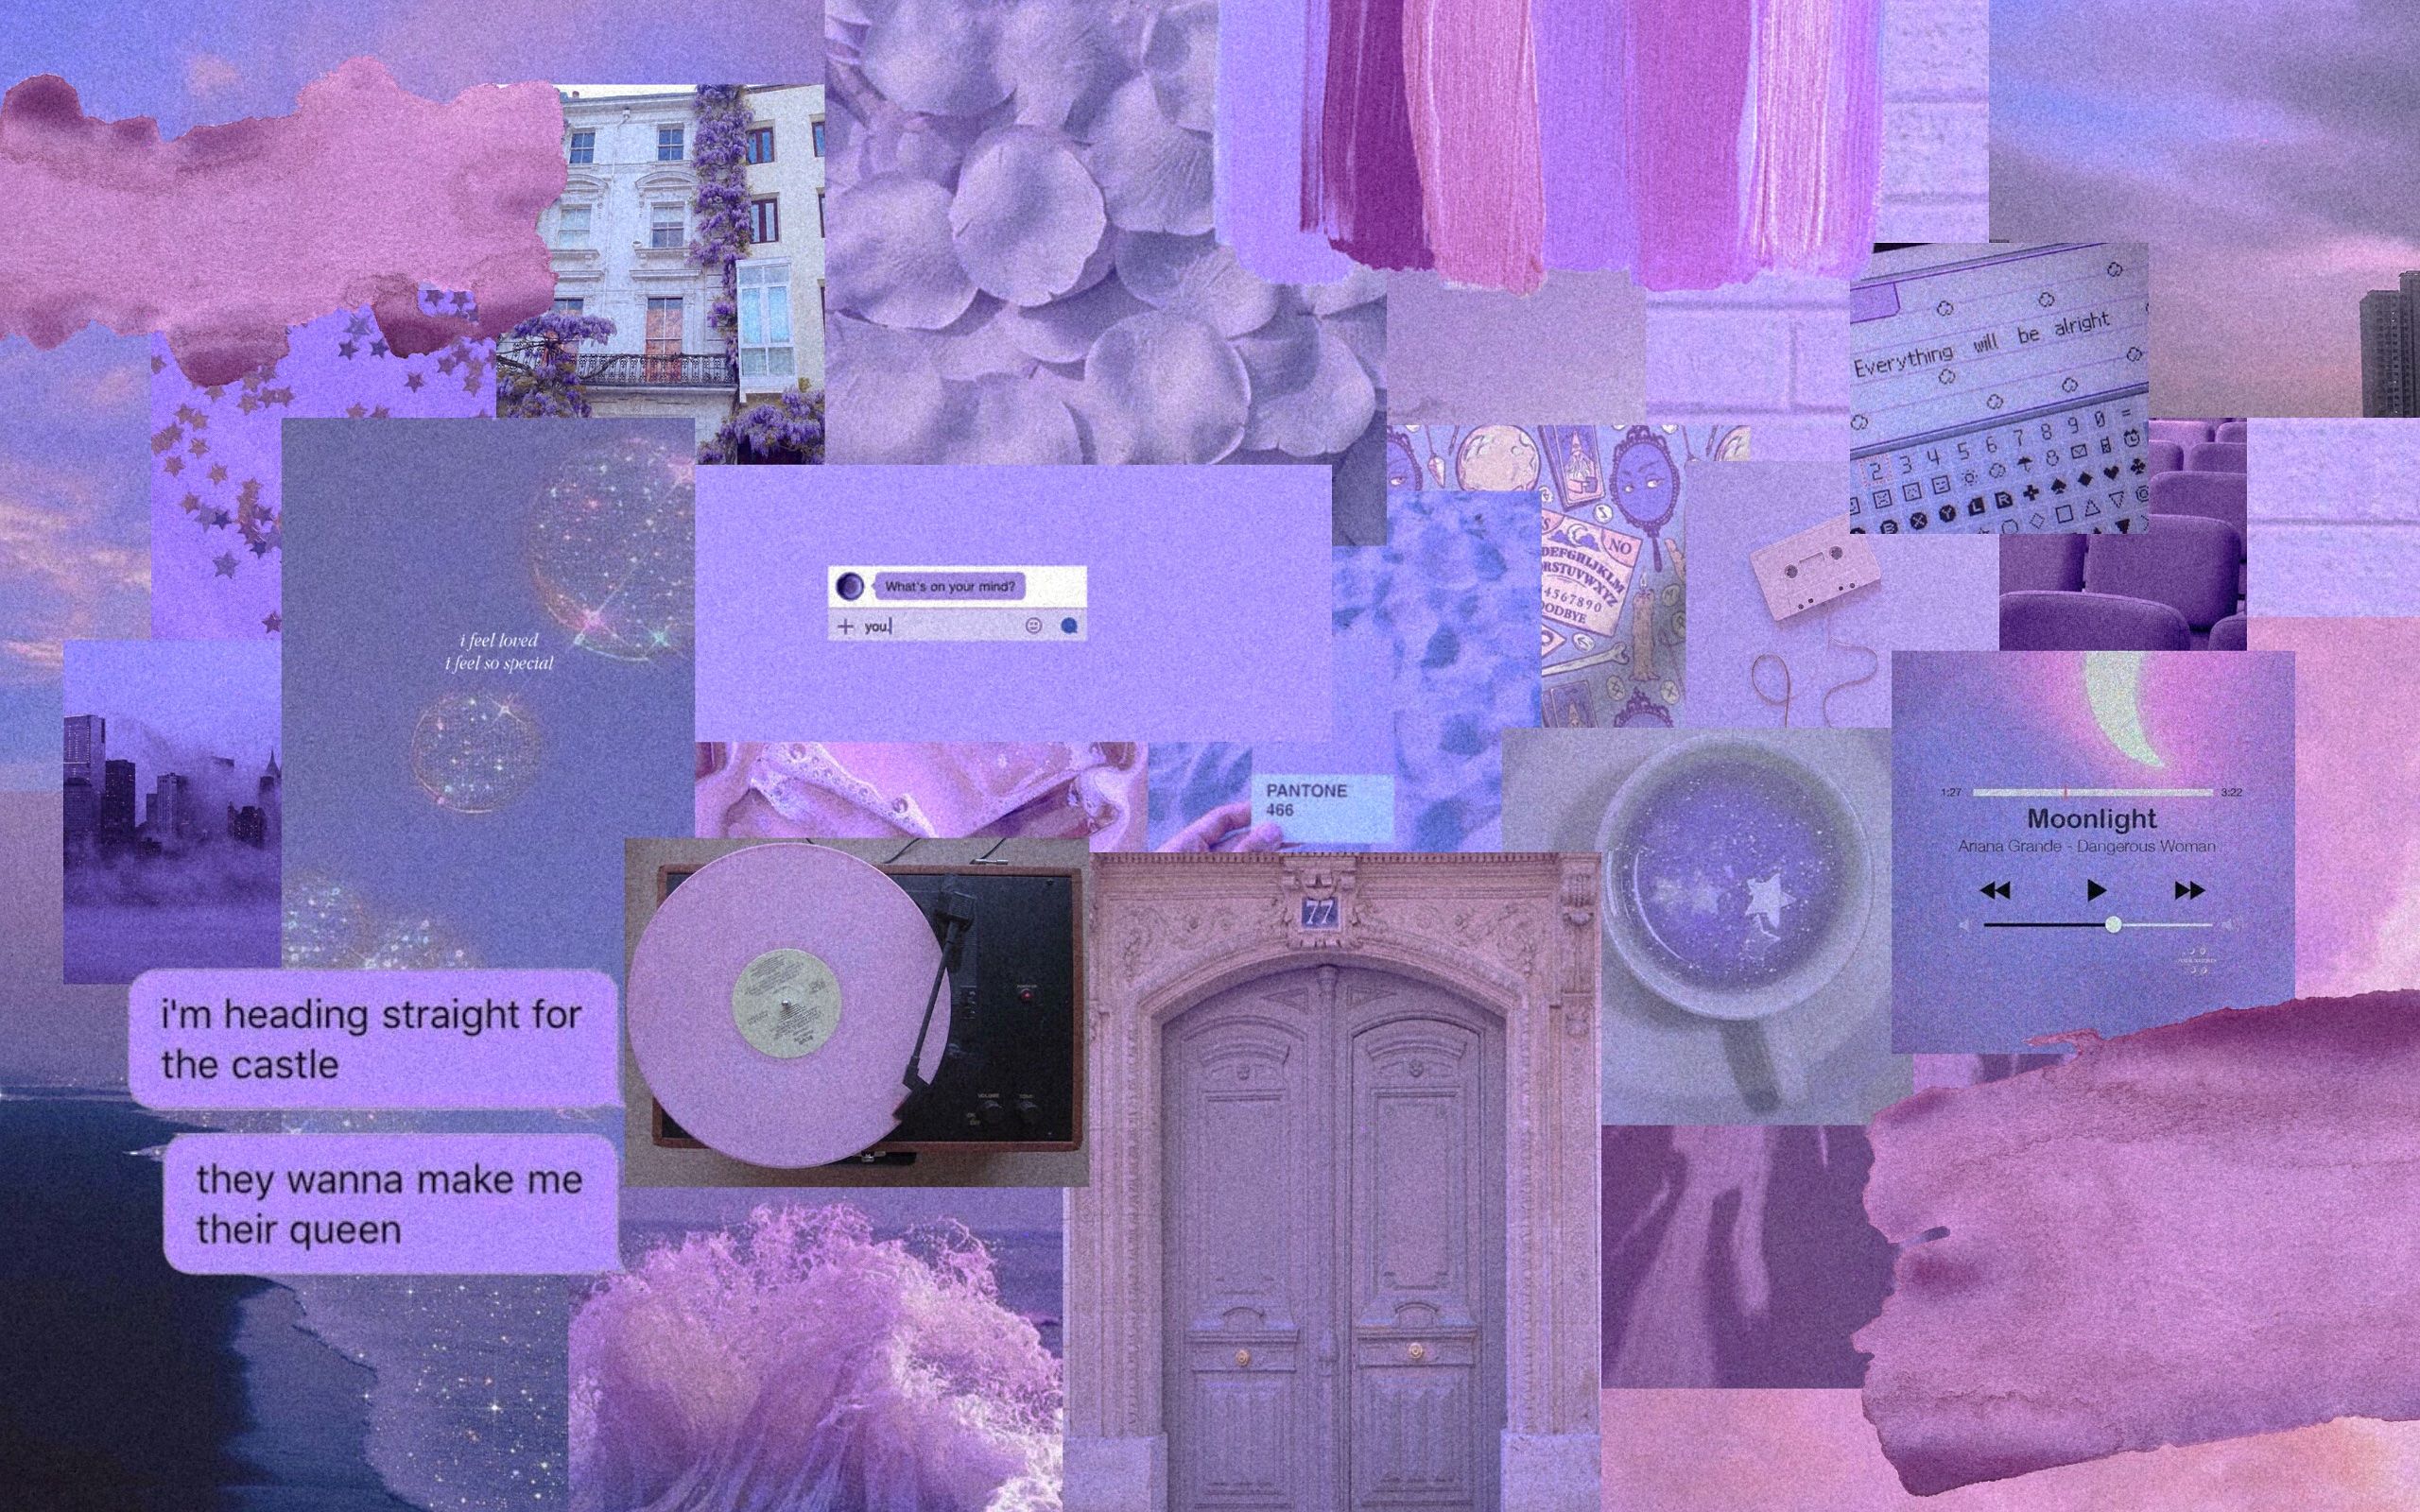 A collage of purple and pink images including a door, a cassette tape, and text. - 